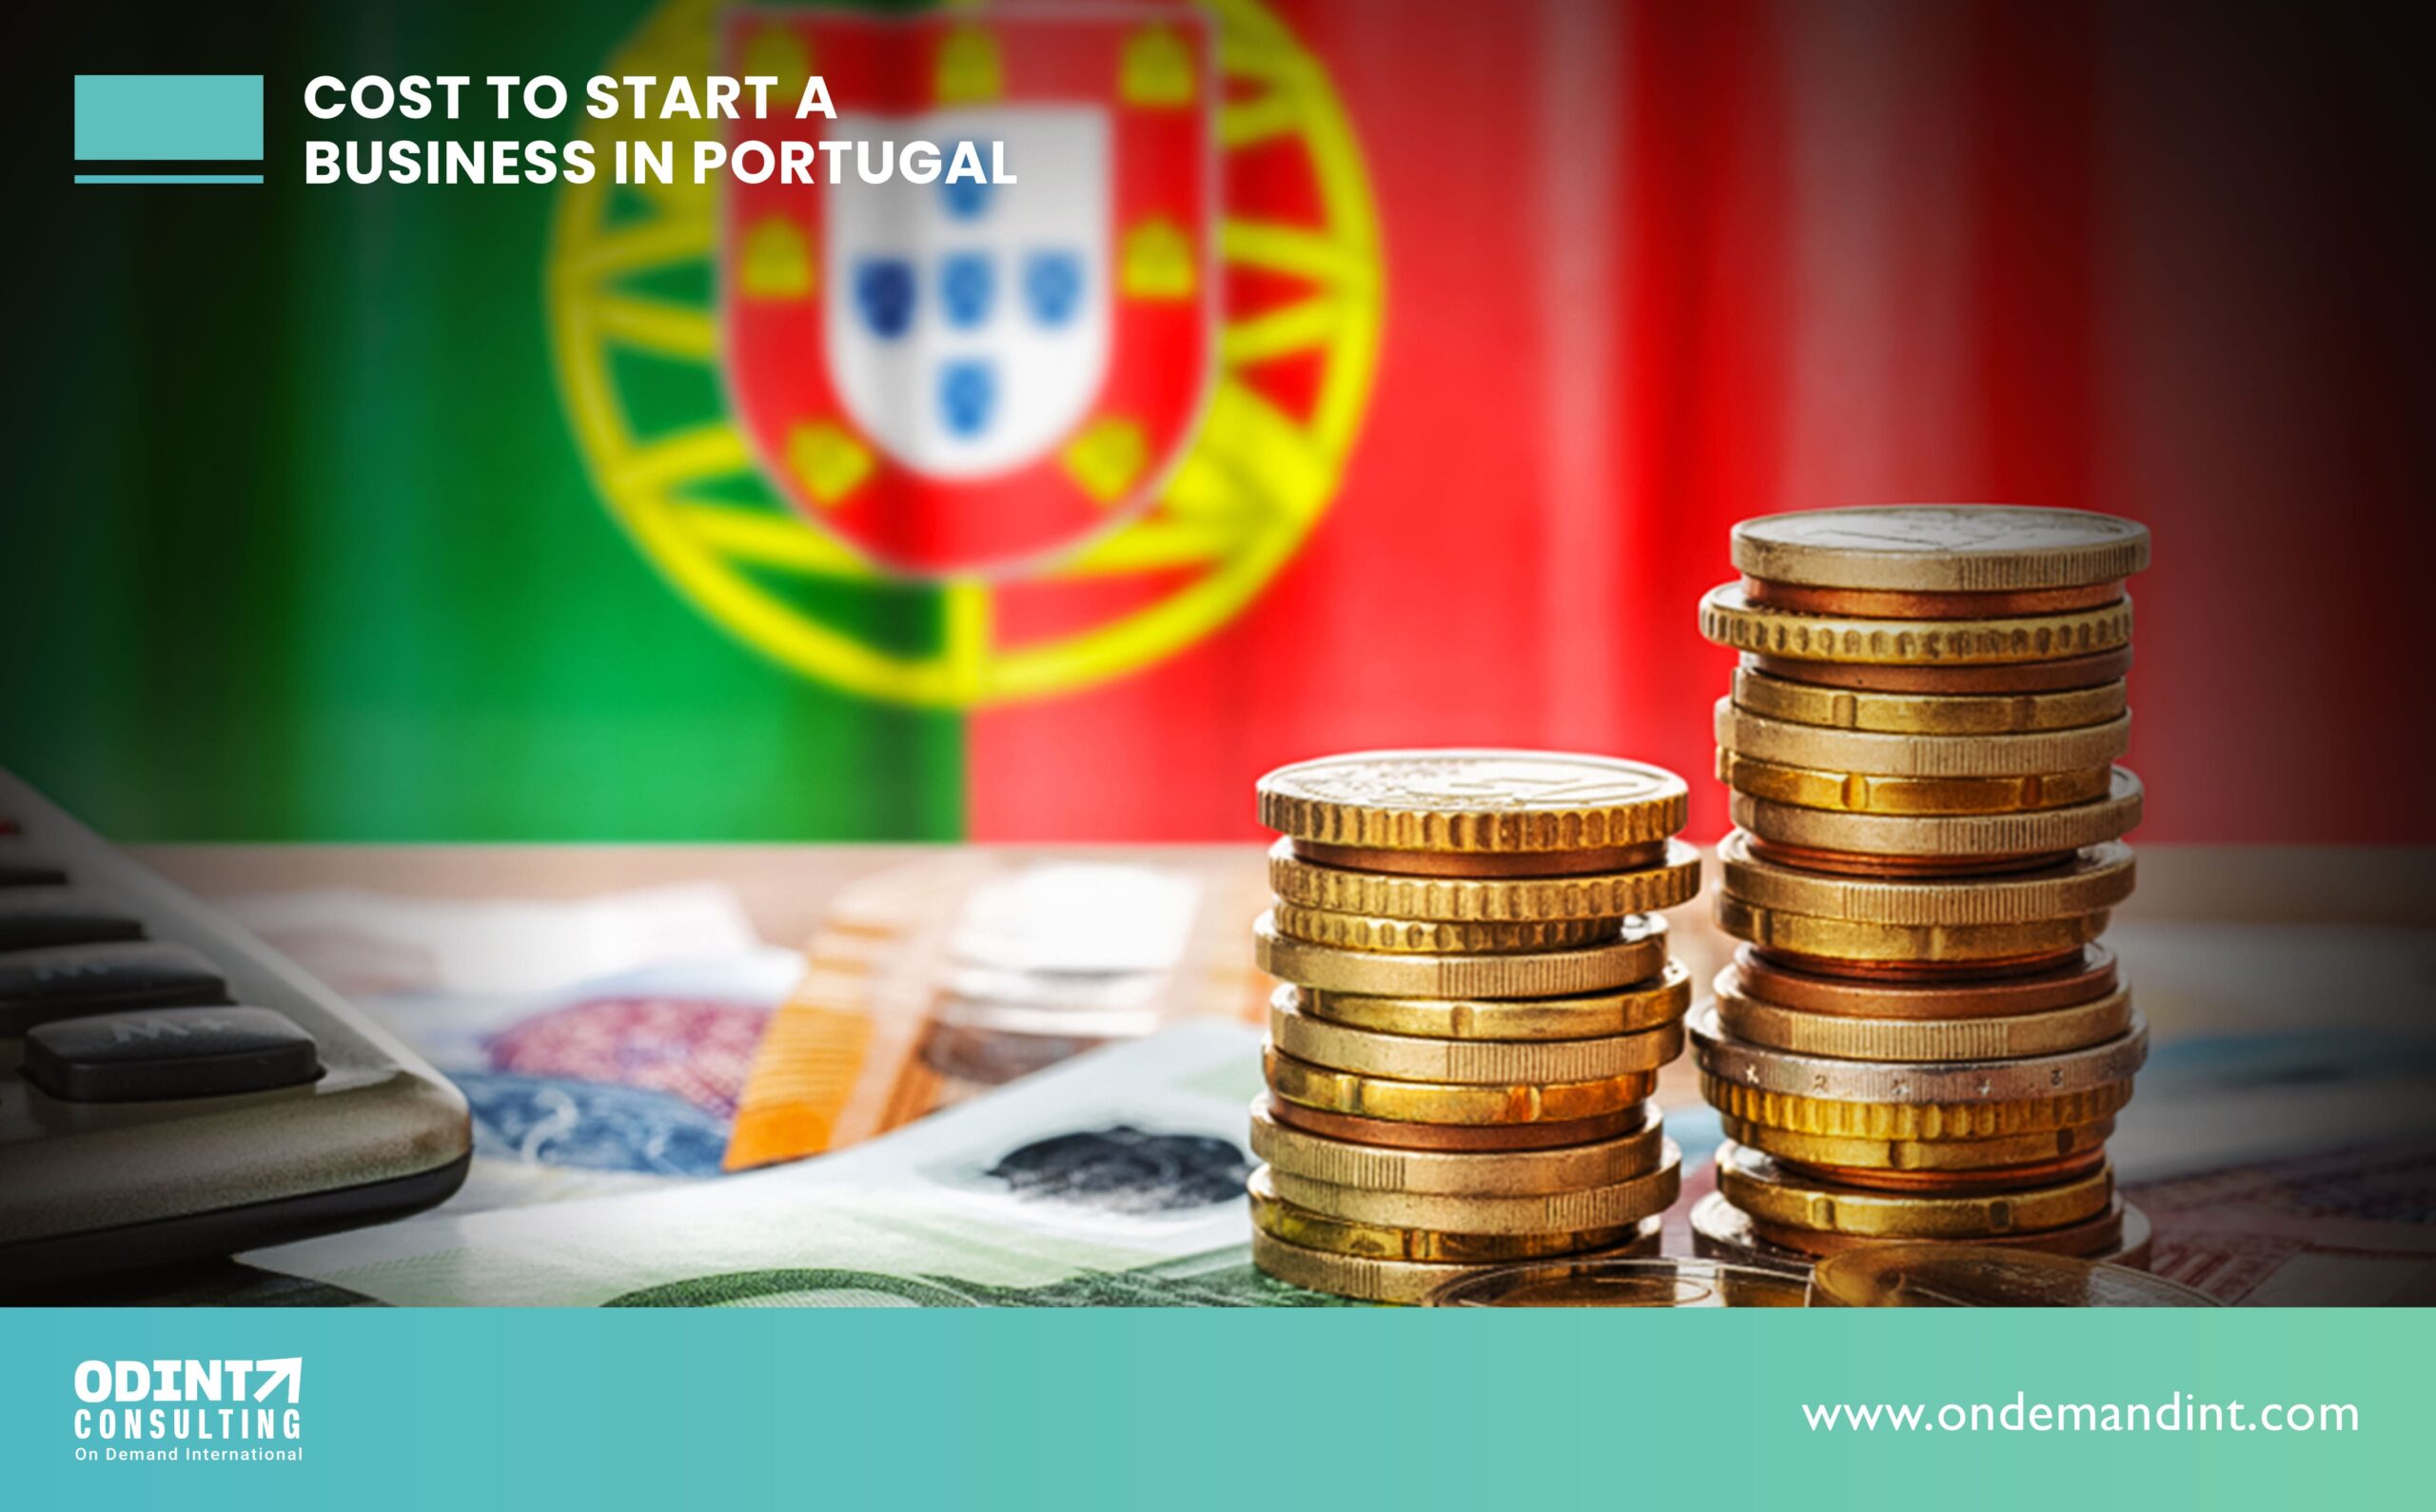 How Much Does It Cost To Start A Business In Portugal?